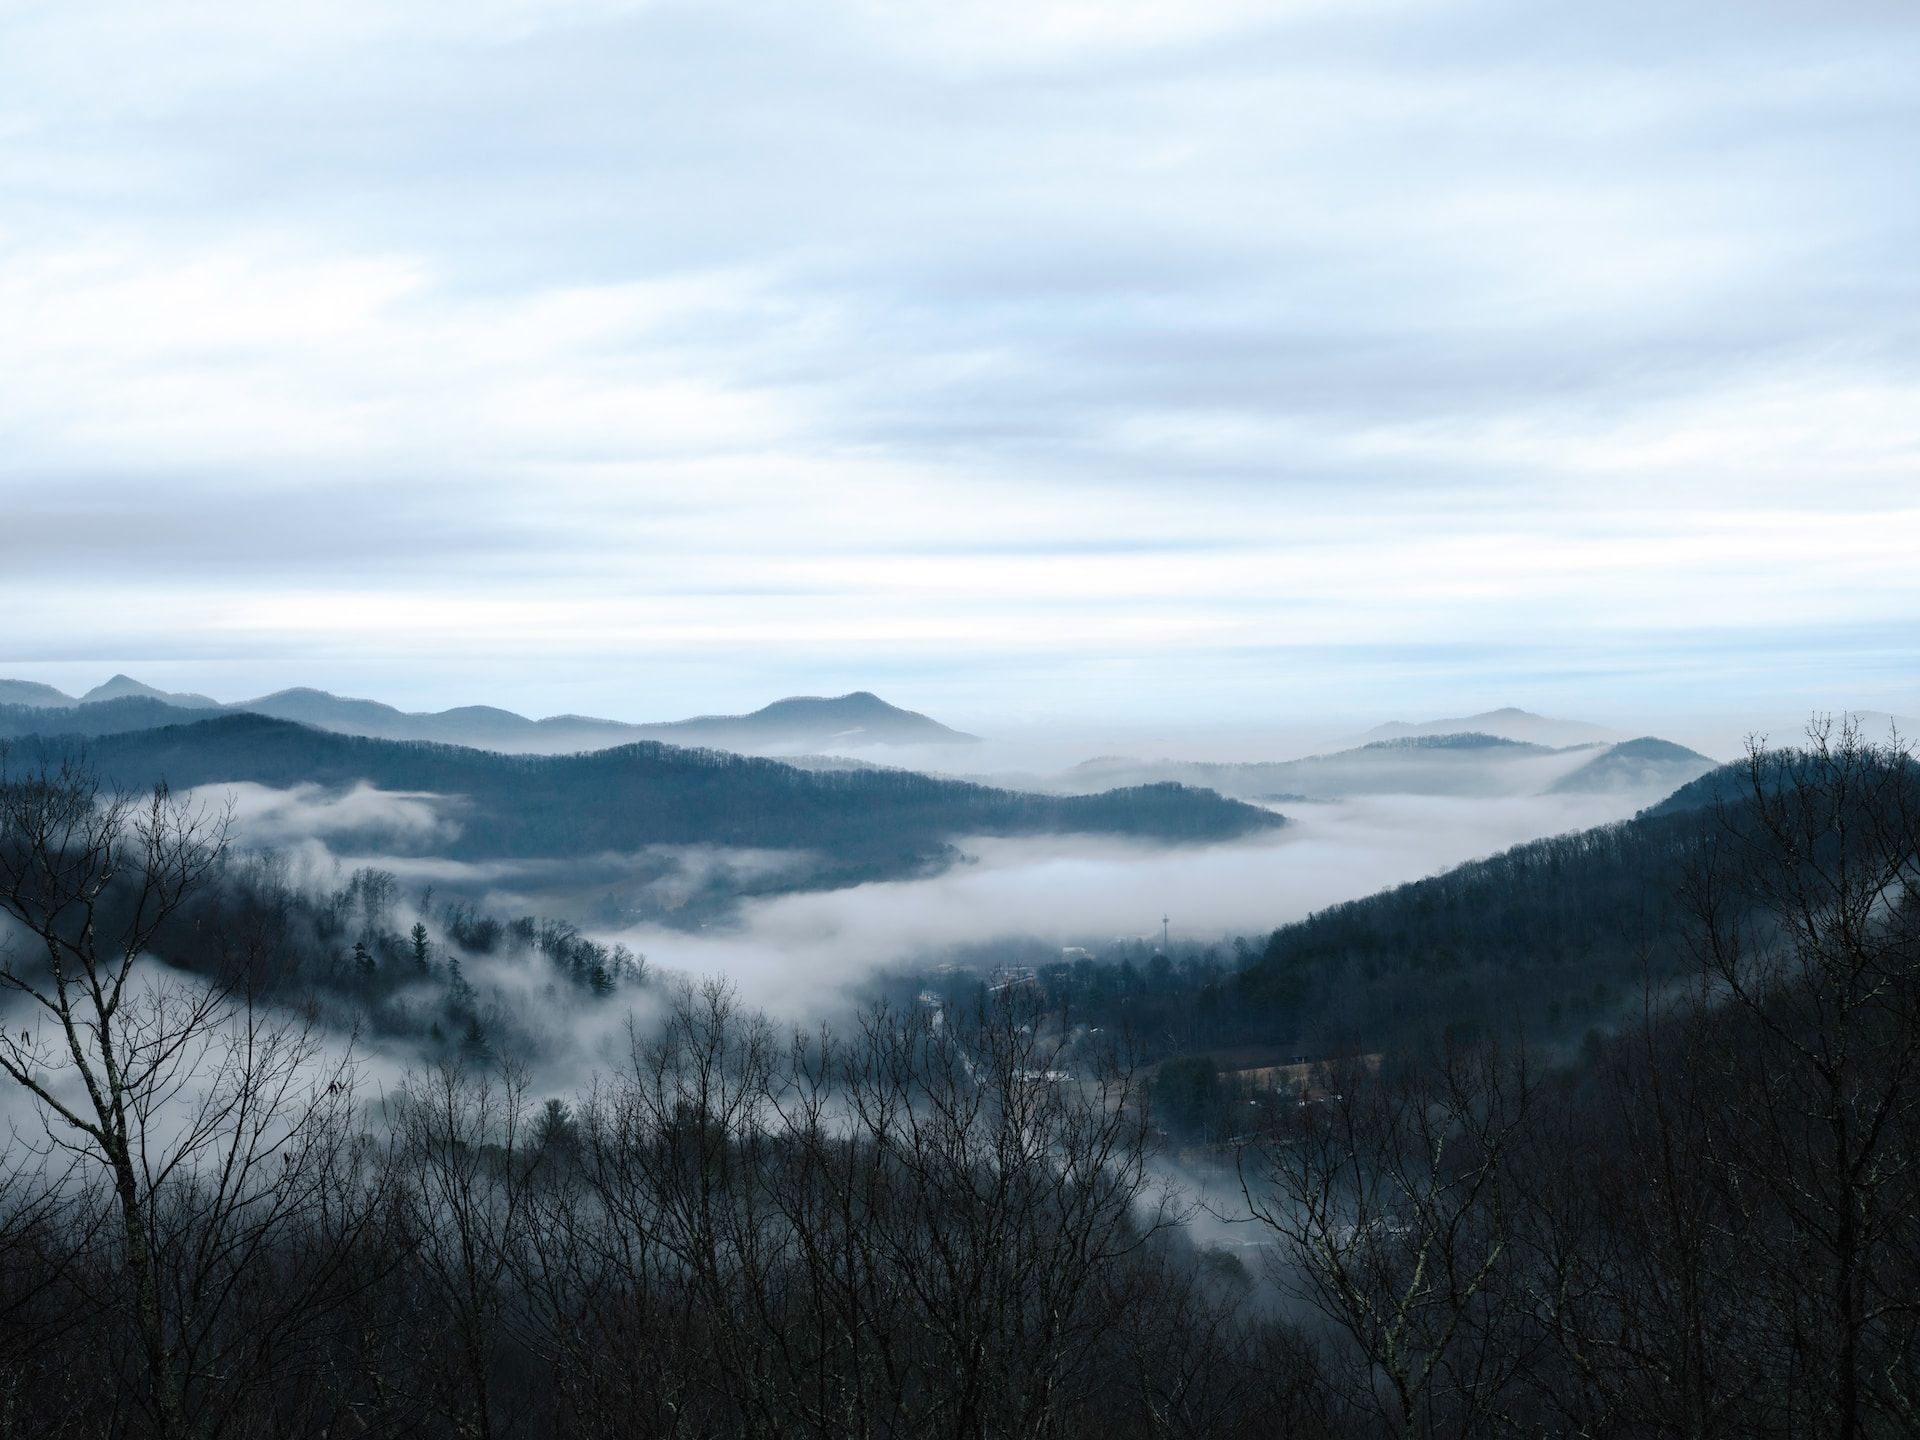 Misty winter morning in the Blue Ridge Mountains